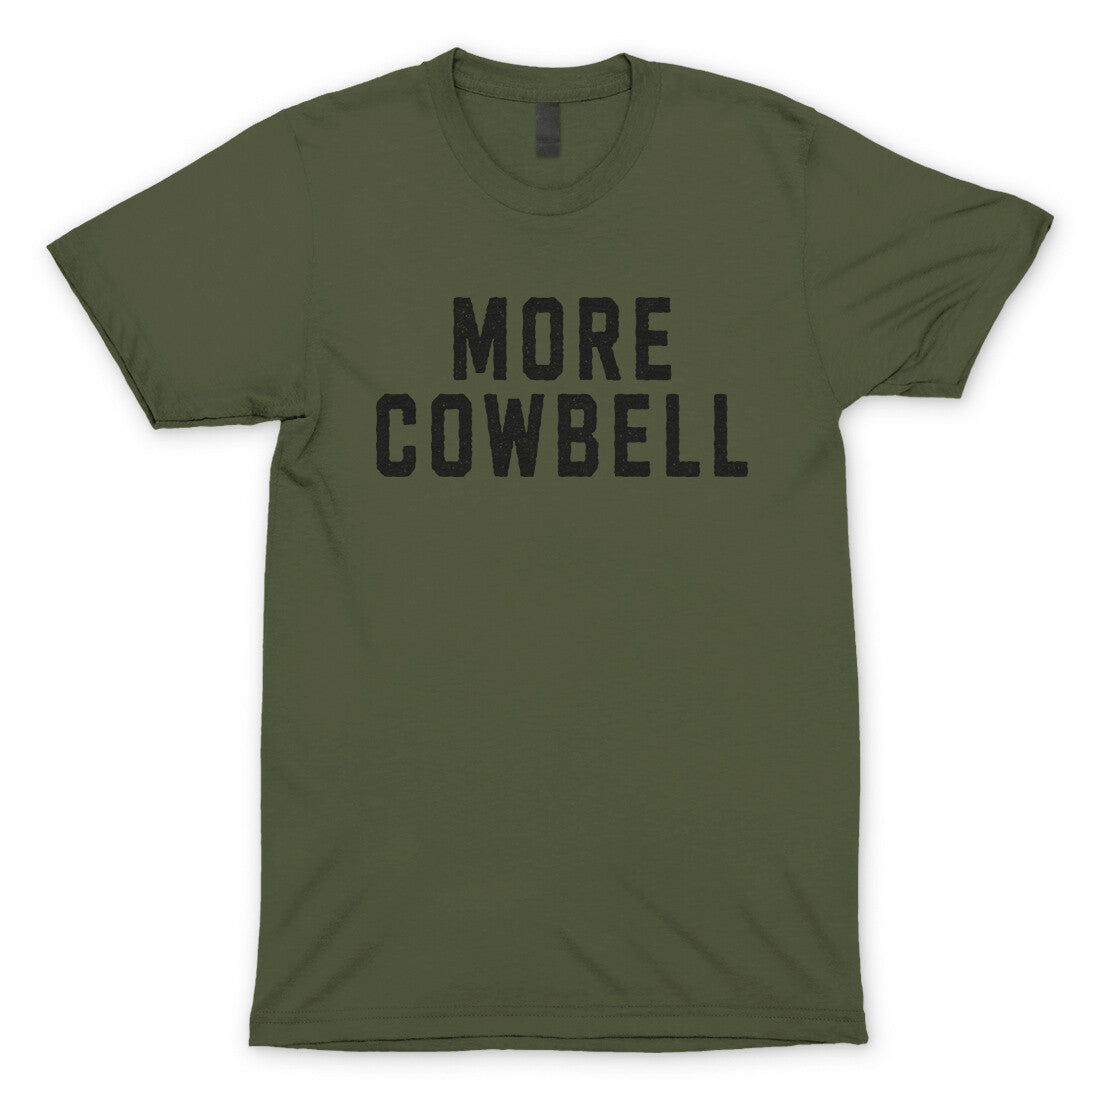 More Cowbell in Military Green Color